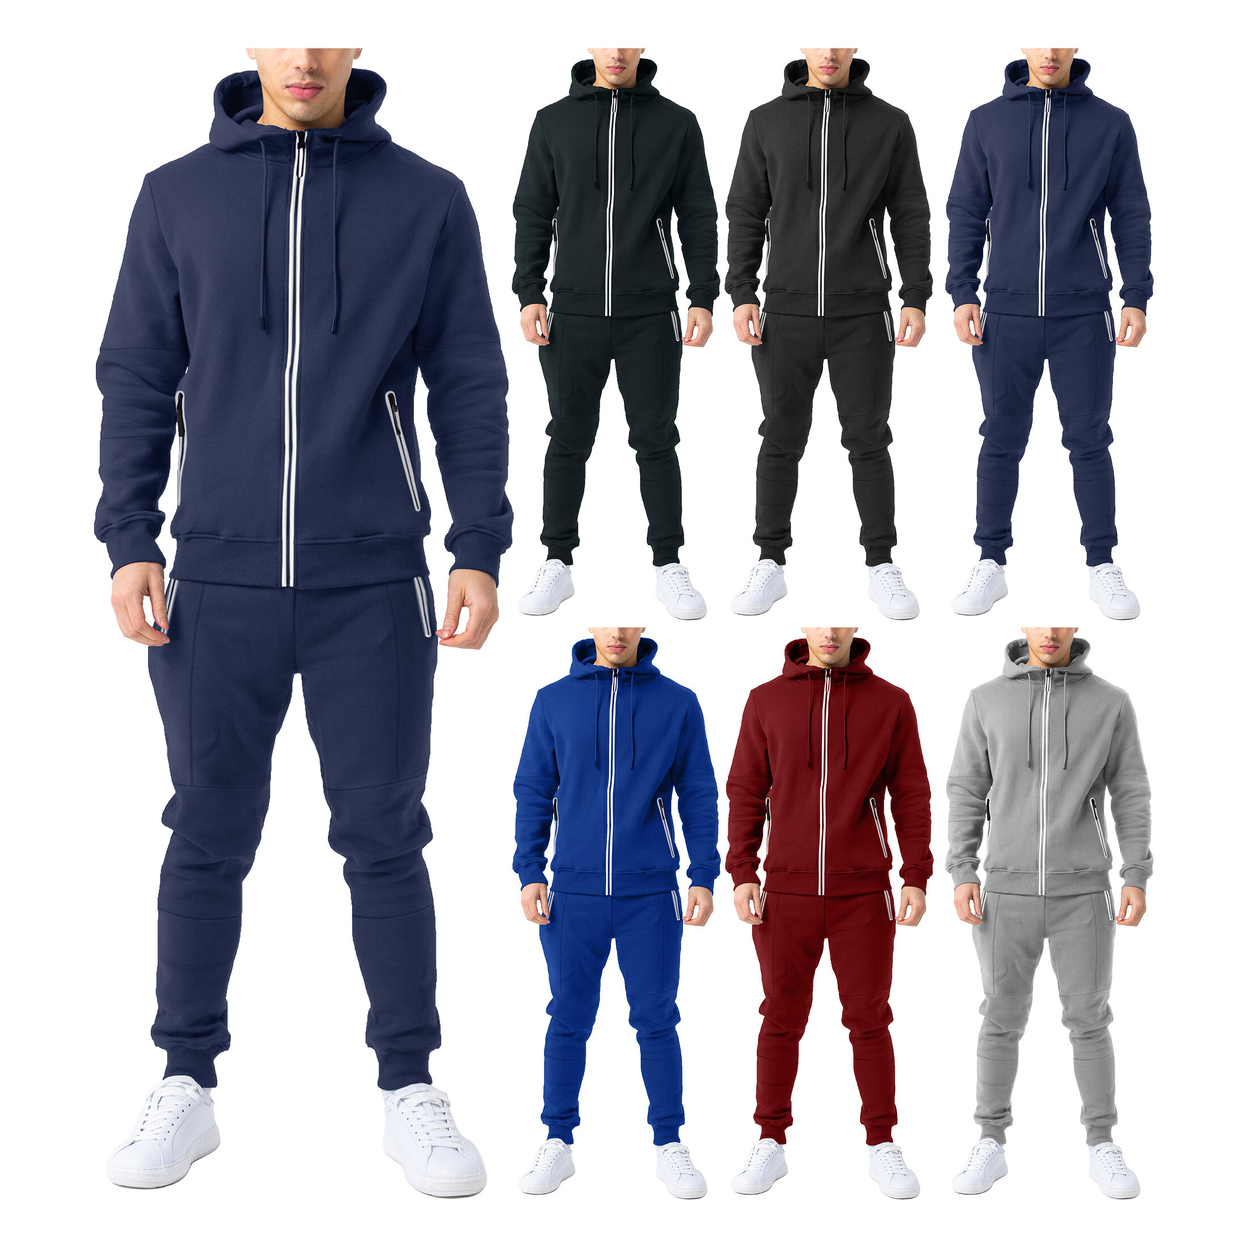 2-Pack: Men's Cozy Slim Fit Active Athletic Full Zip Hoodie And Jogger Tracksuit - Red & Blue, Xx-large